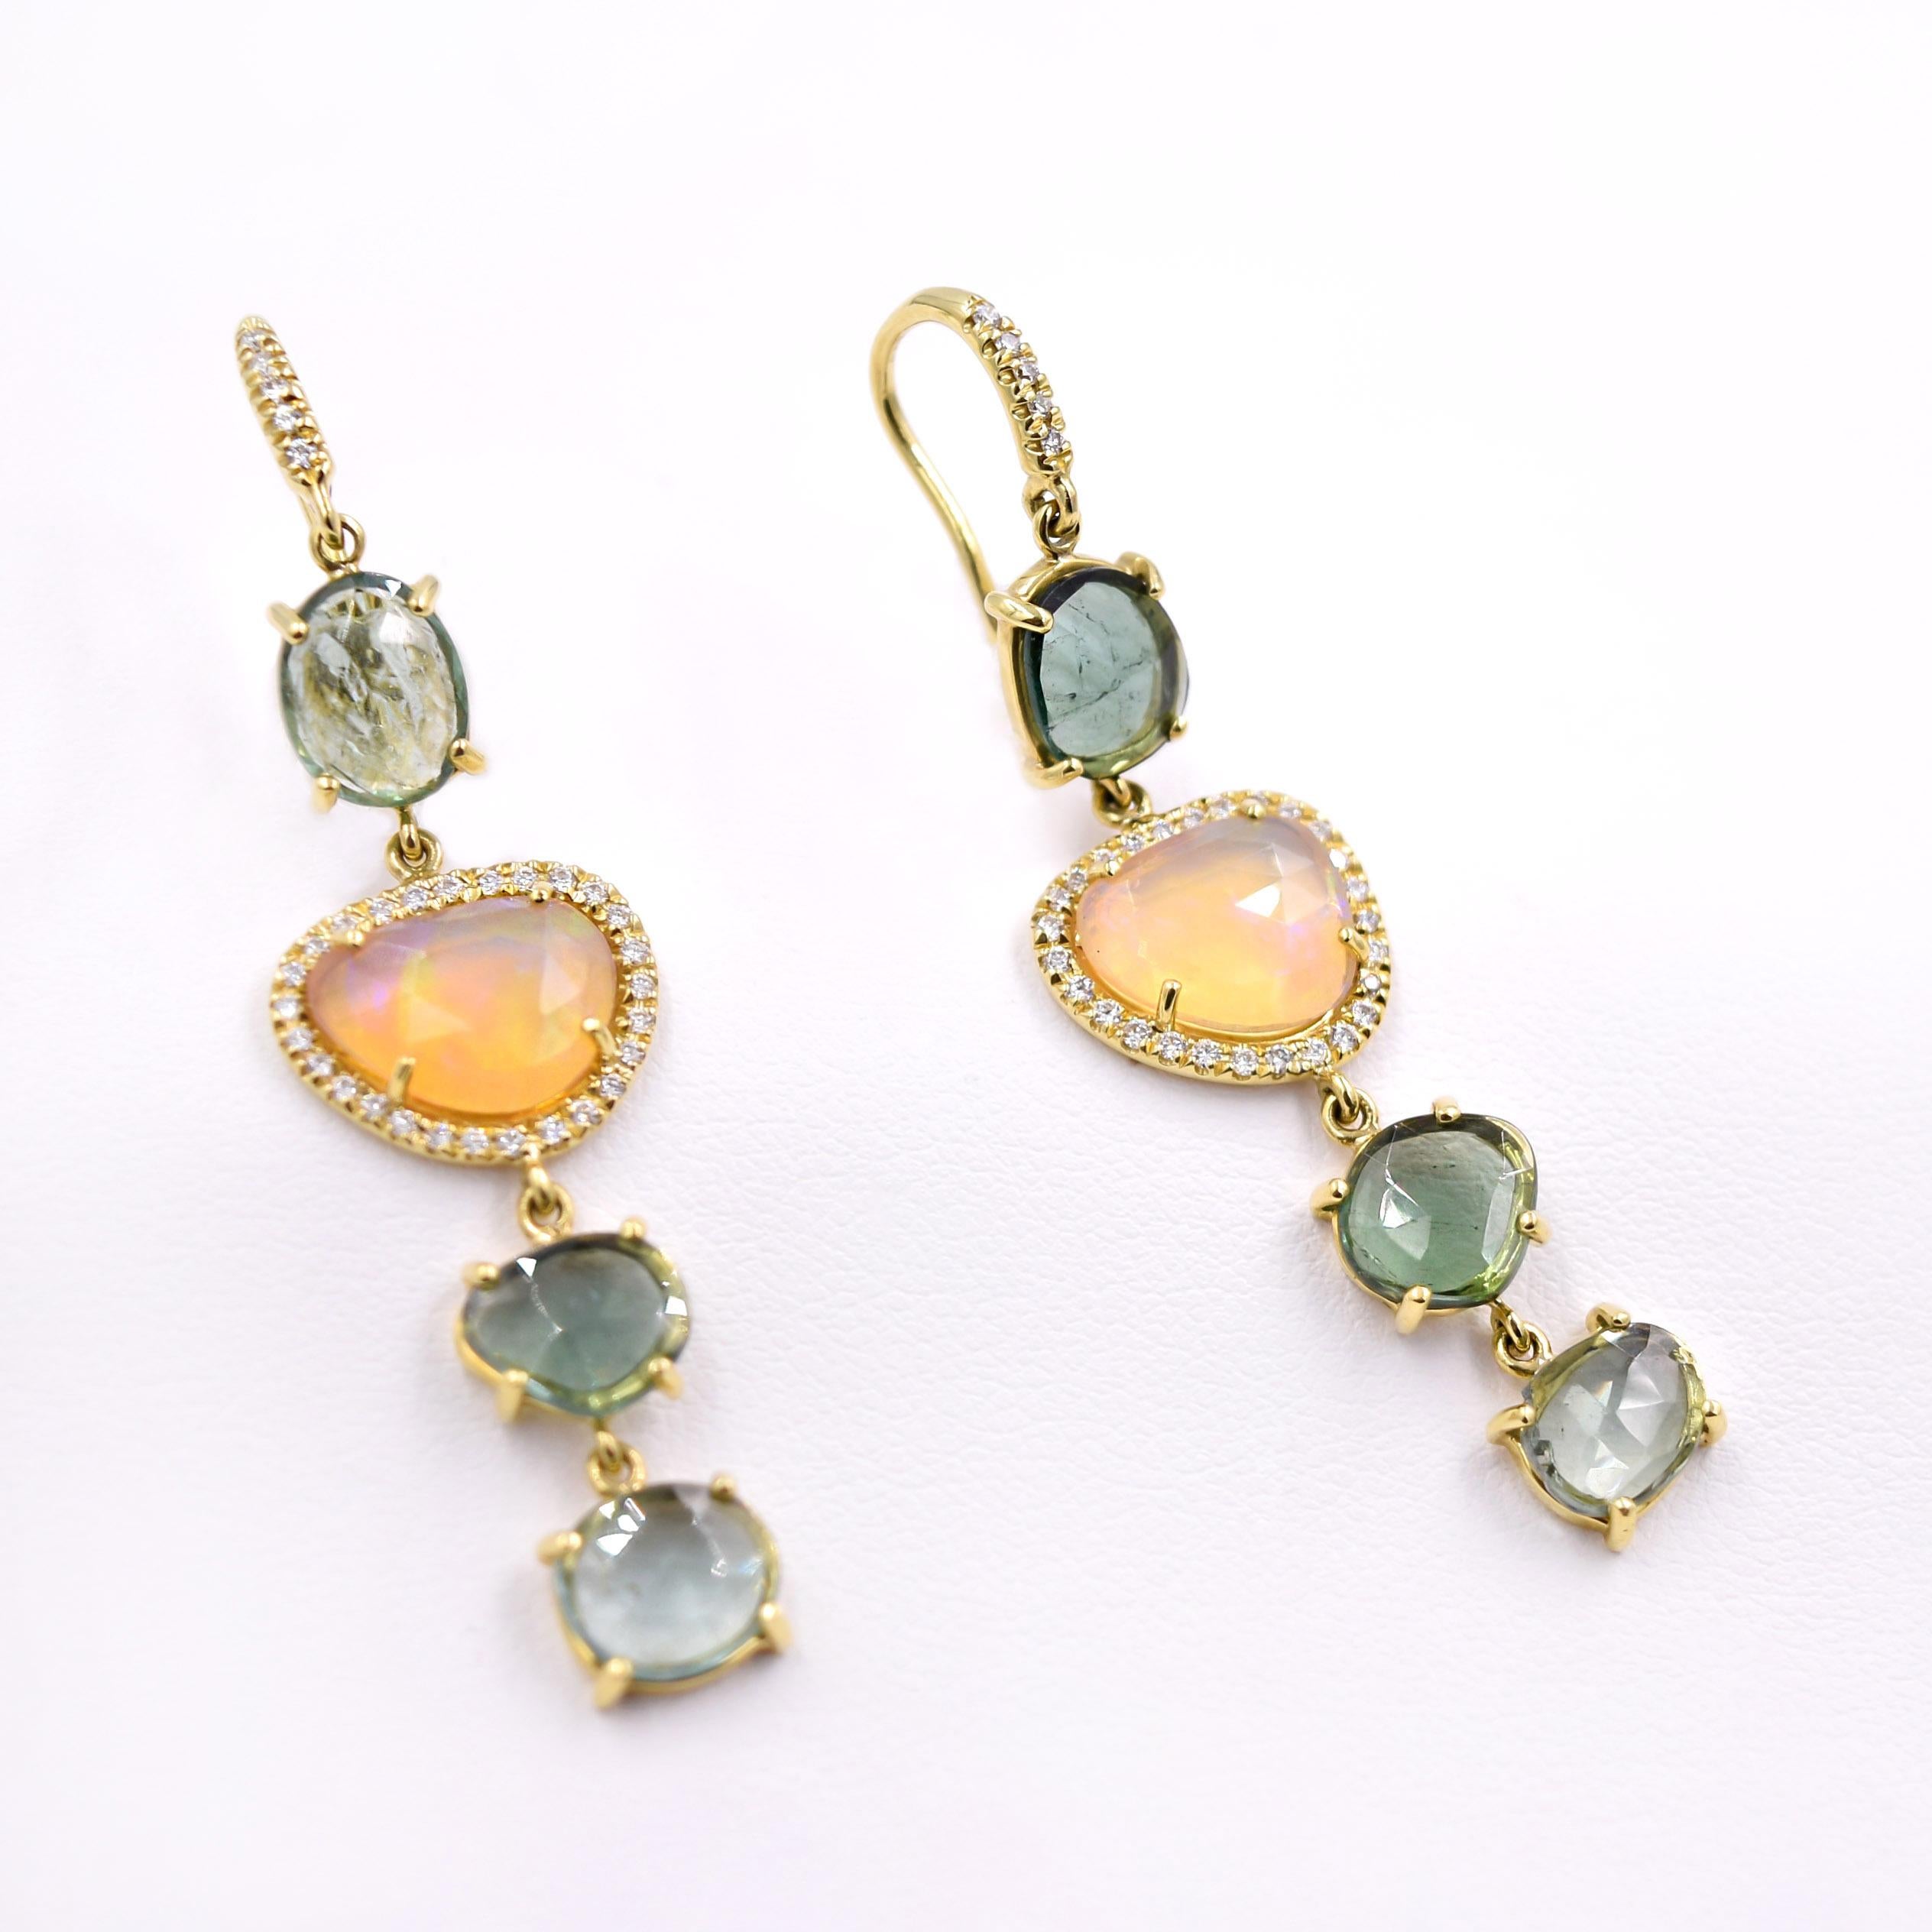 Tourmaline and Opal Dangle Earrings designed by Lauren K.
8.67 carat green tourmaline and rare faceted opal with 0.43 carat white diamonds. 
Stones are set in a prong setting and the metal is 18K Yellow Gold.
Diamonds pave set on the 18 karat yellow